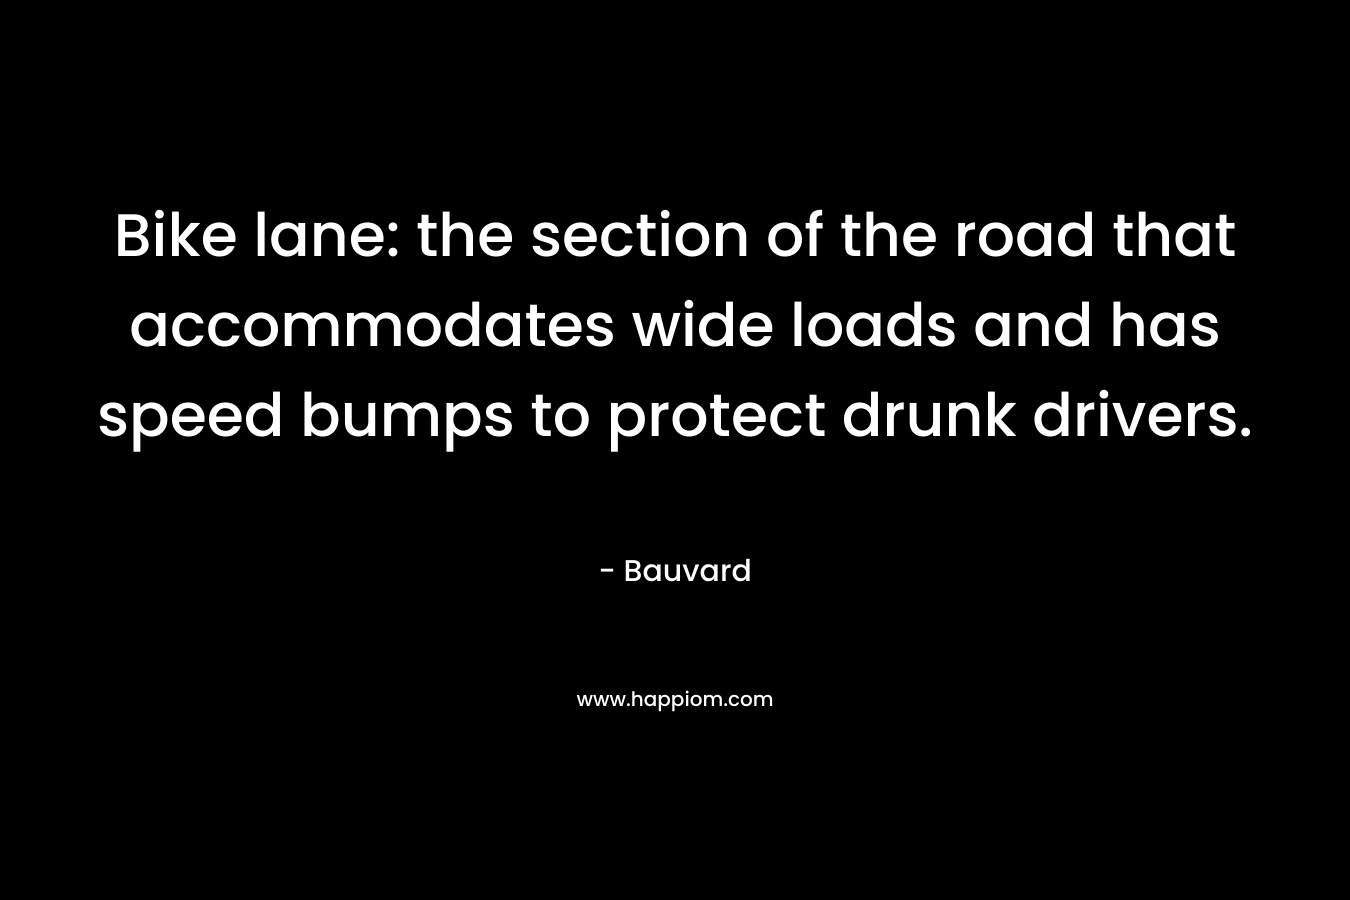 Bike lane: the section of the road that accommodates wide loads and has speed bumps to protect drunk drivers. – Bauvard